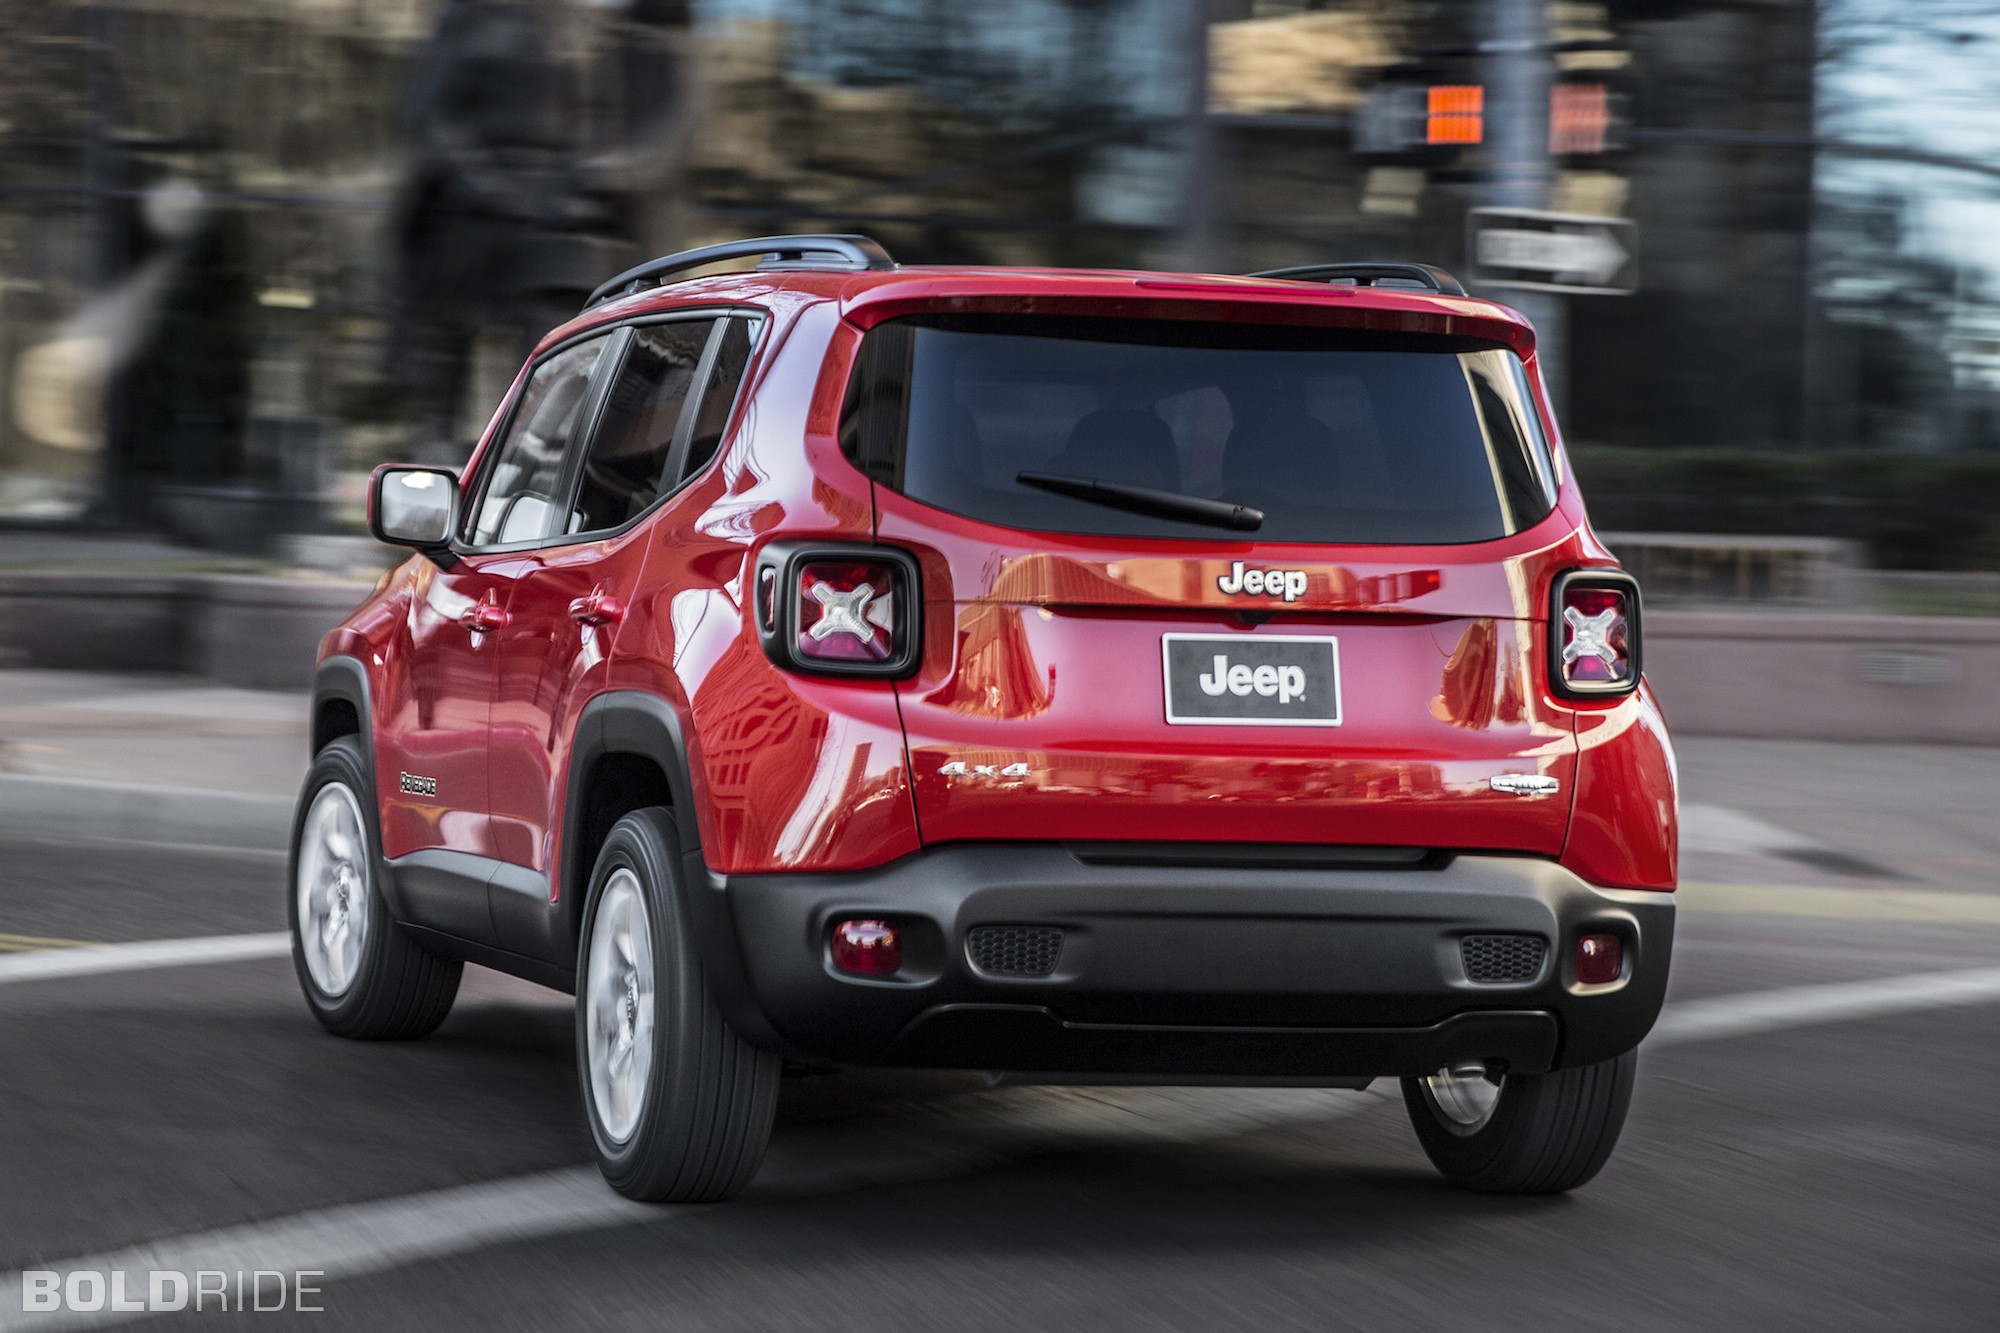 General 2000x1333 car red cars Jeep vehicle Jeep Renegade motion blur crossover American cars Stellantis